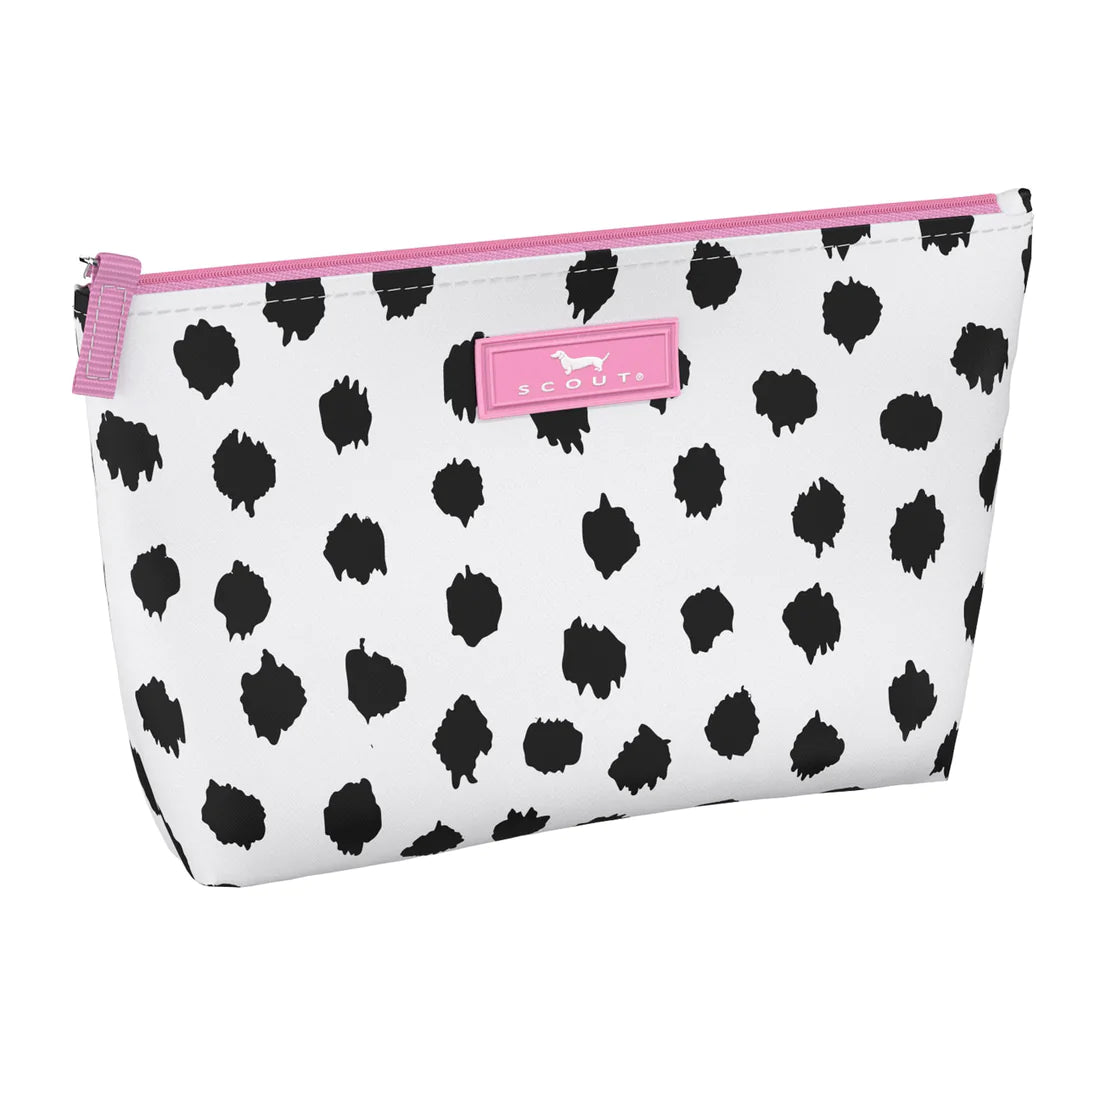 Scout Twiggy Makeup Bag - Seeing Spots